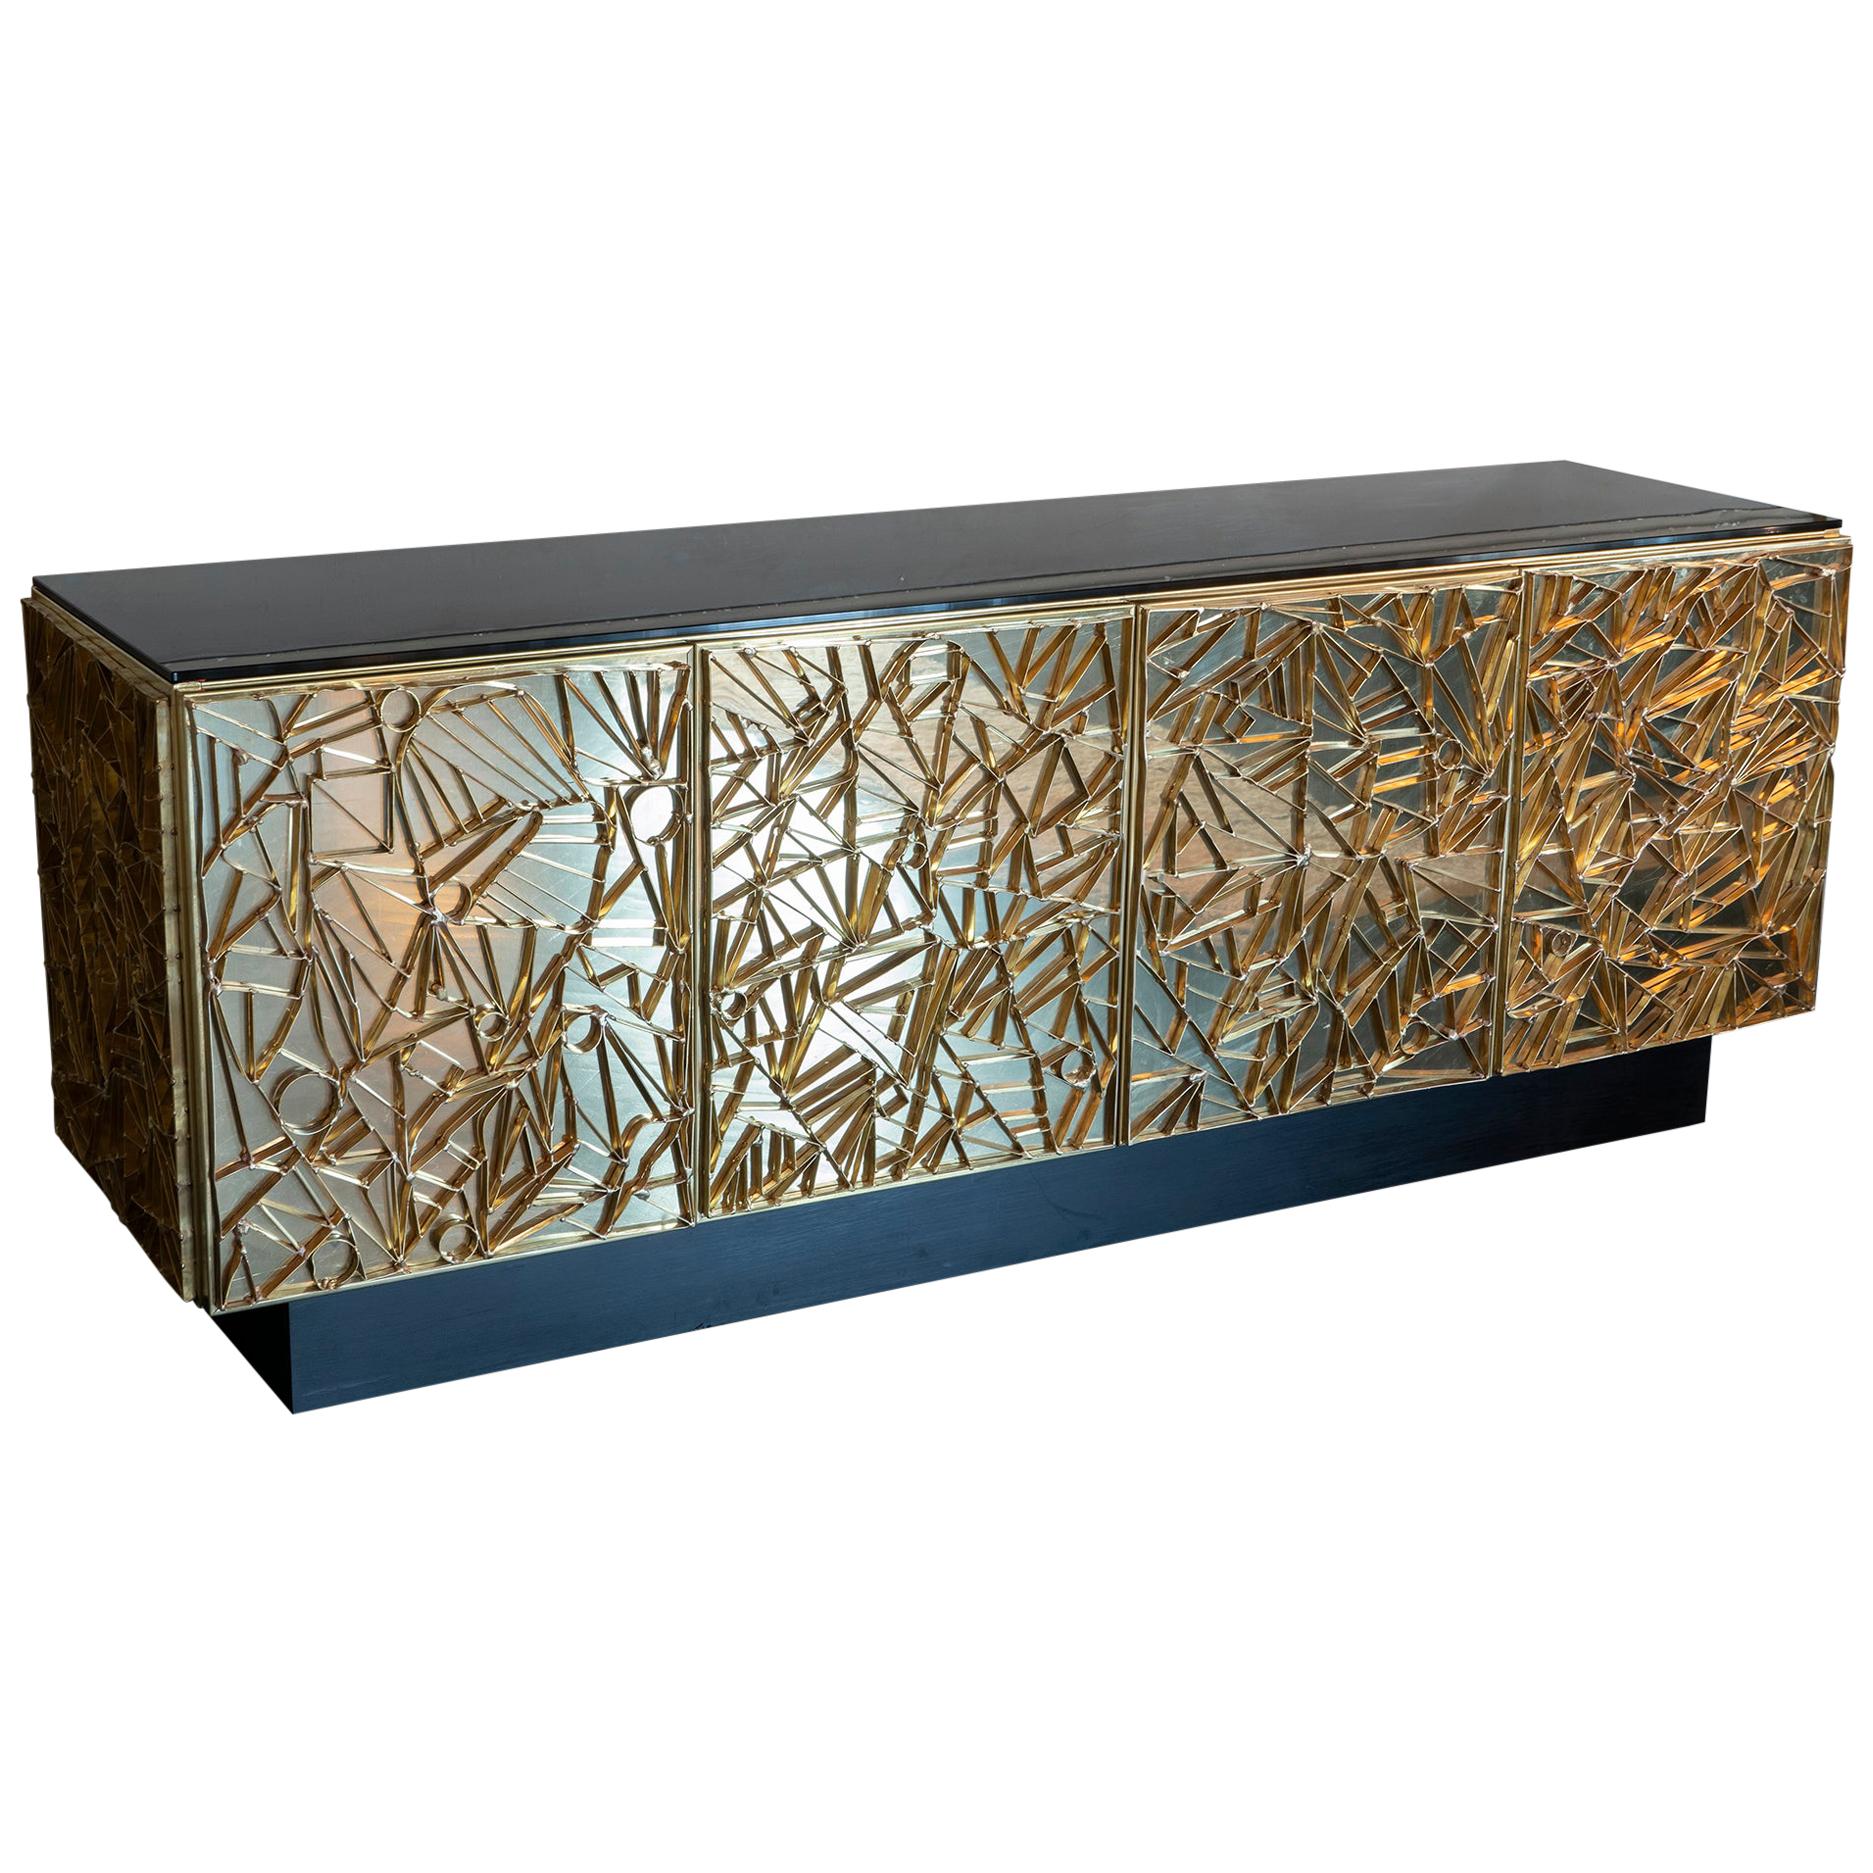 Flair Edition "Nest" Natural Brass Sideboard, Italy, 2019 For Sale